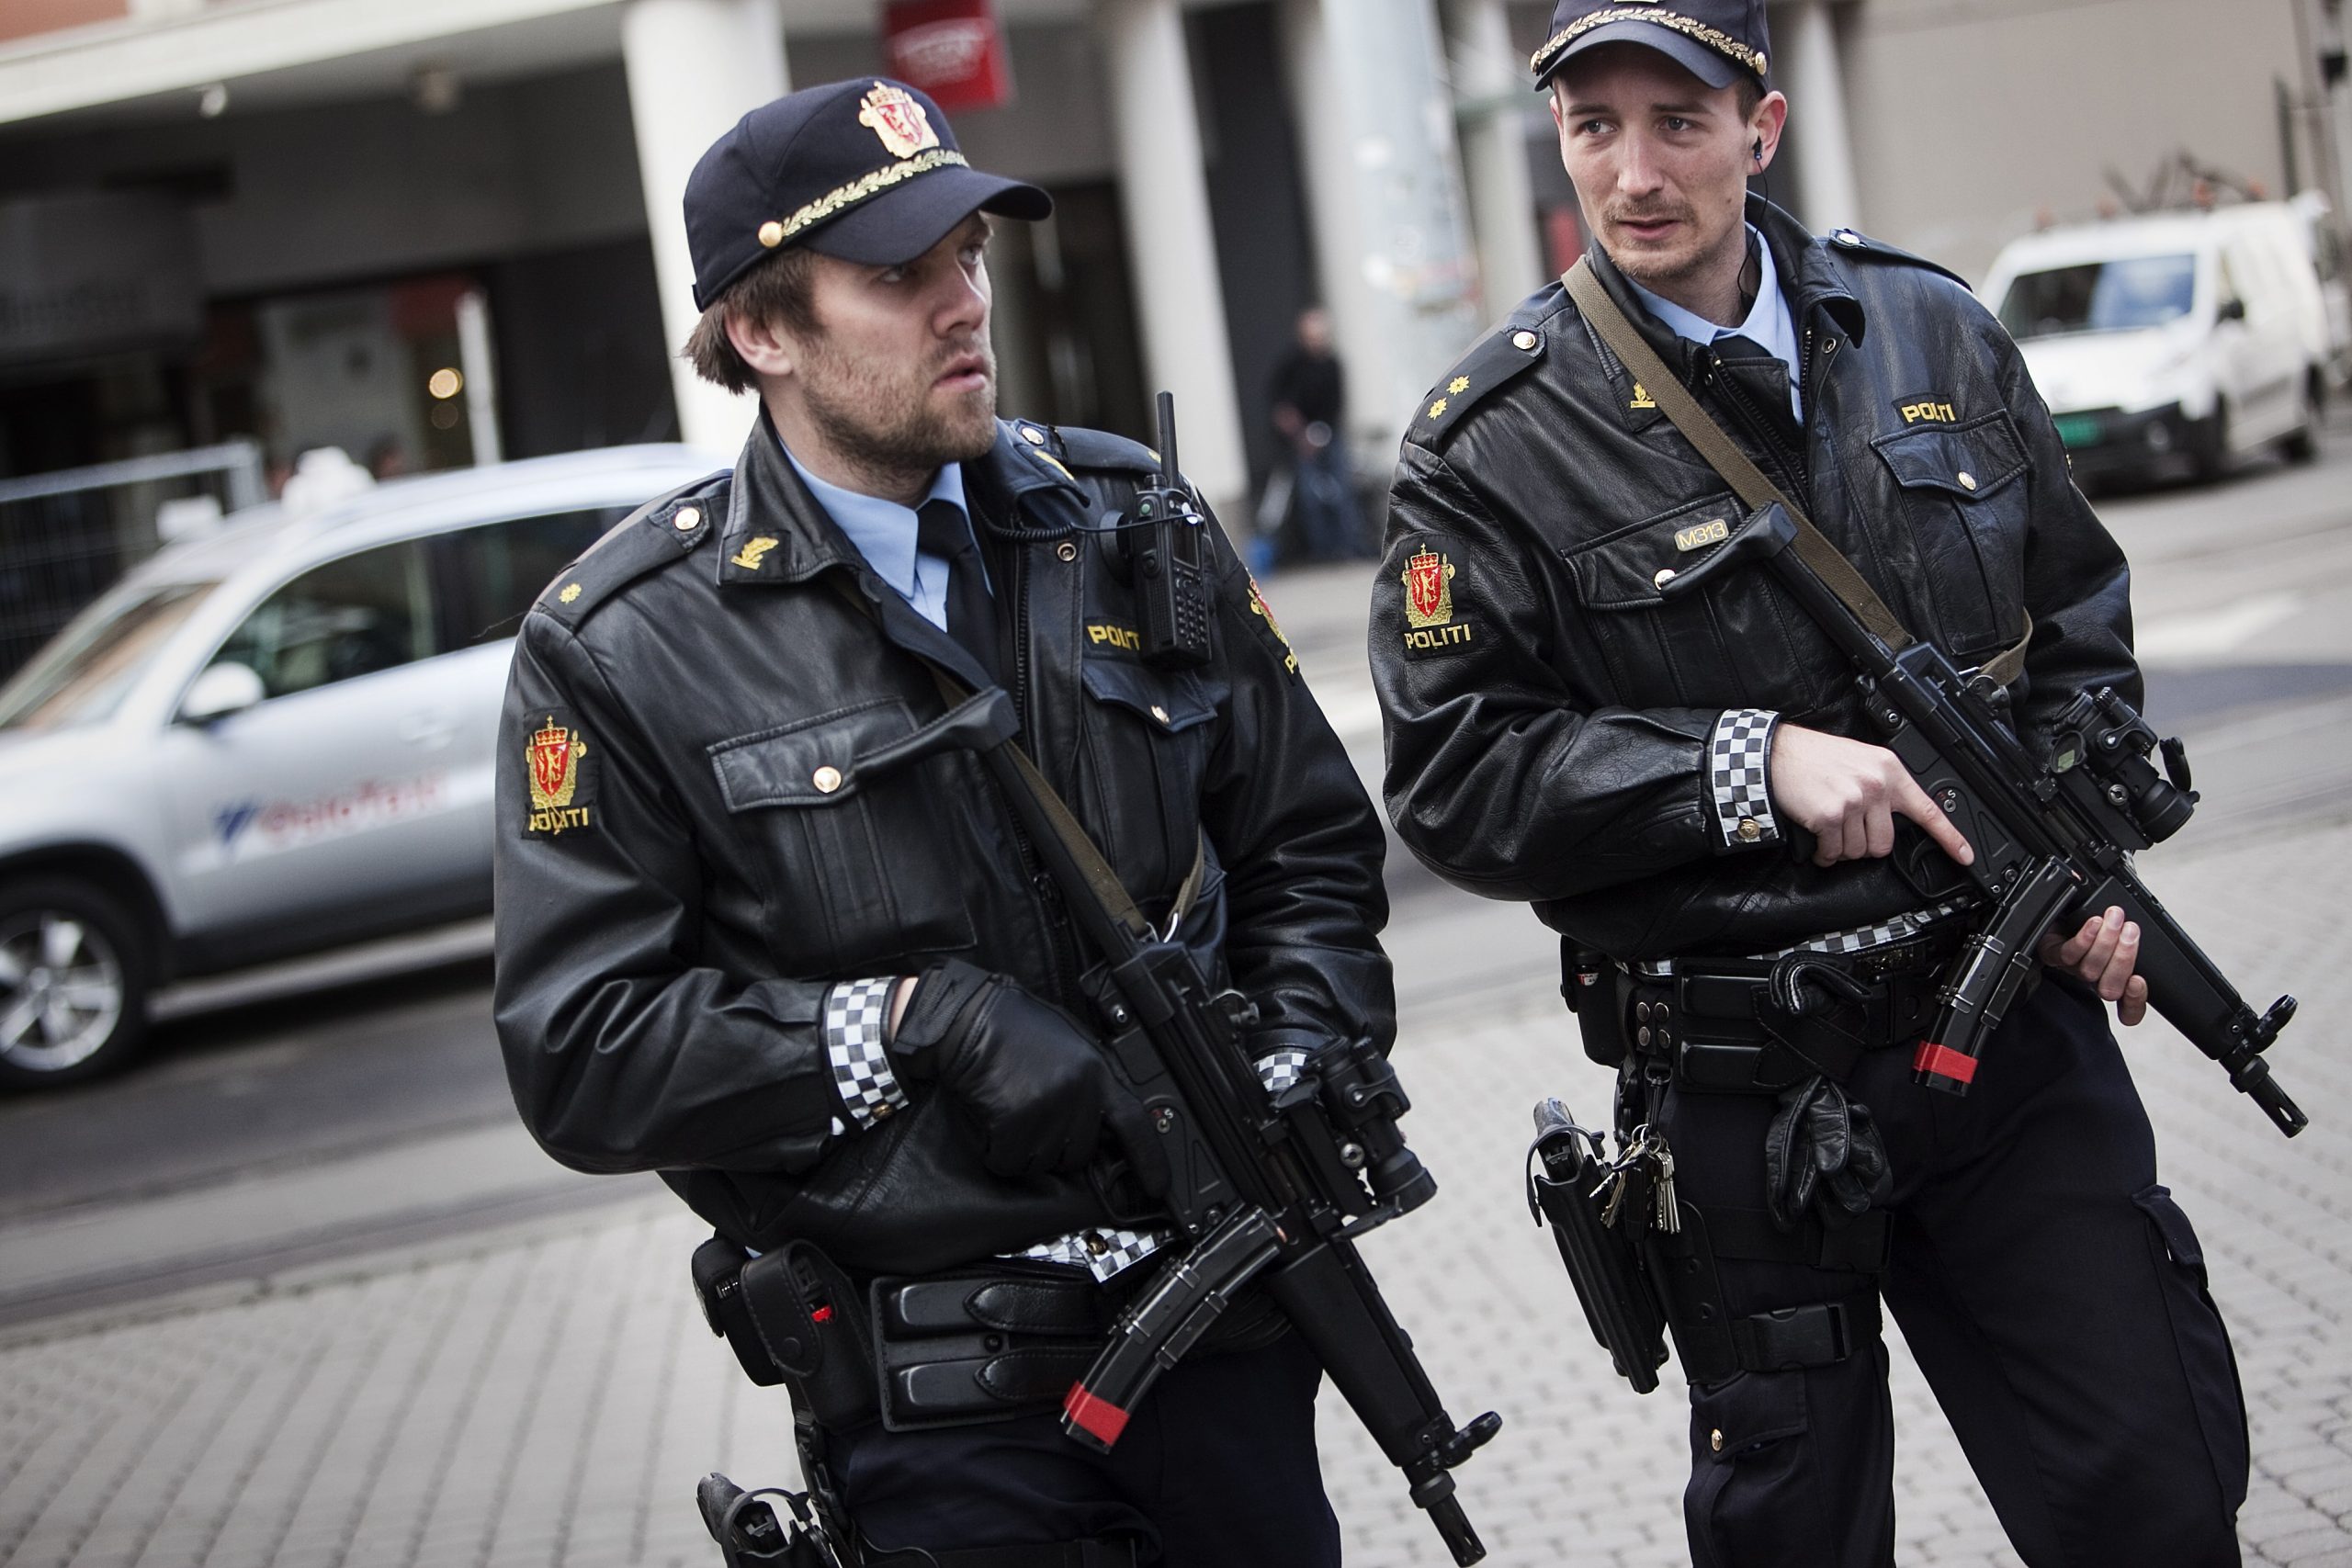 Bow and arrow attack in Norway appears to have been an act of terror